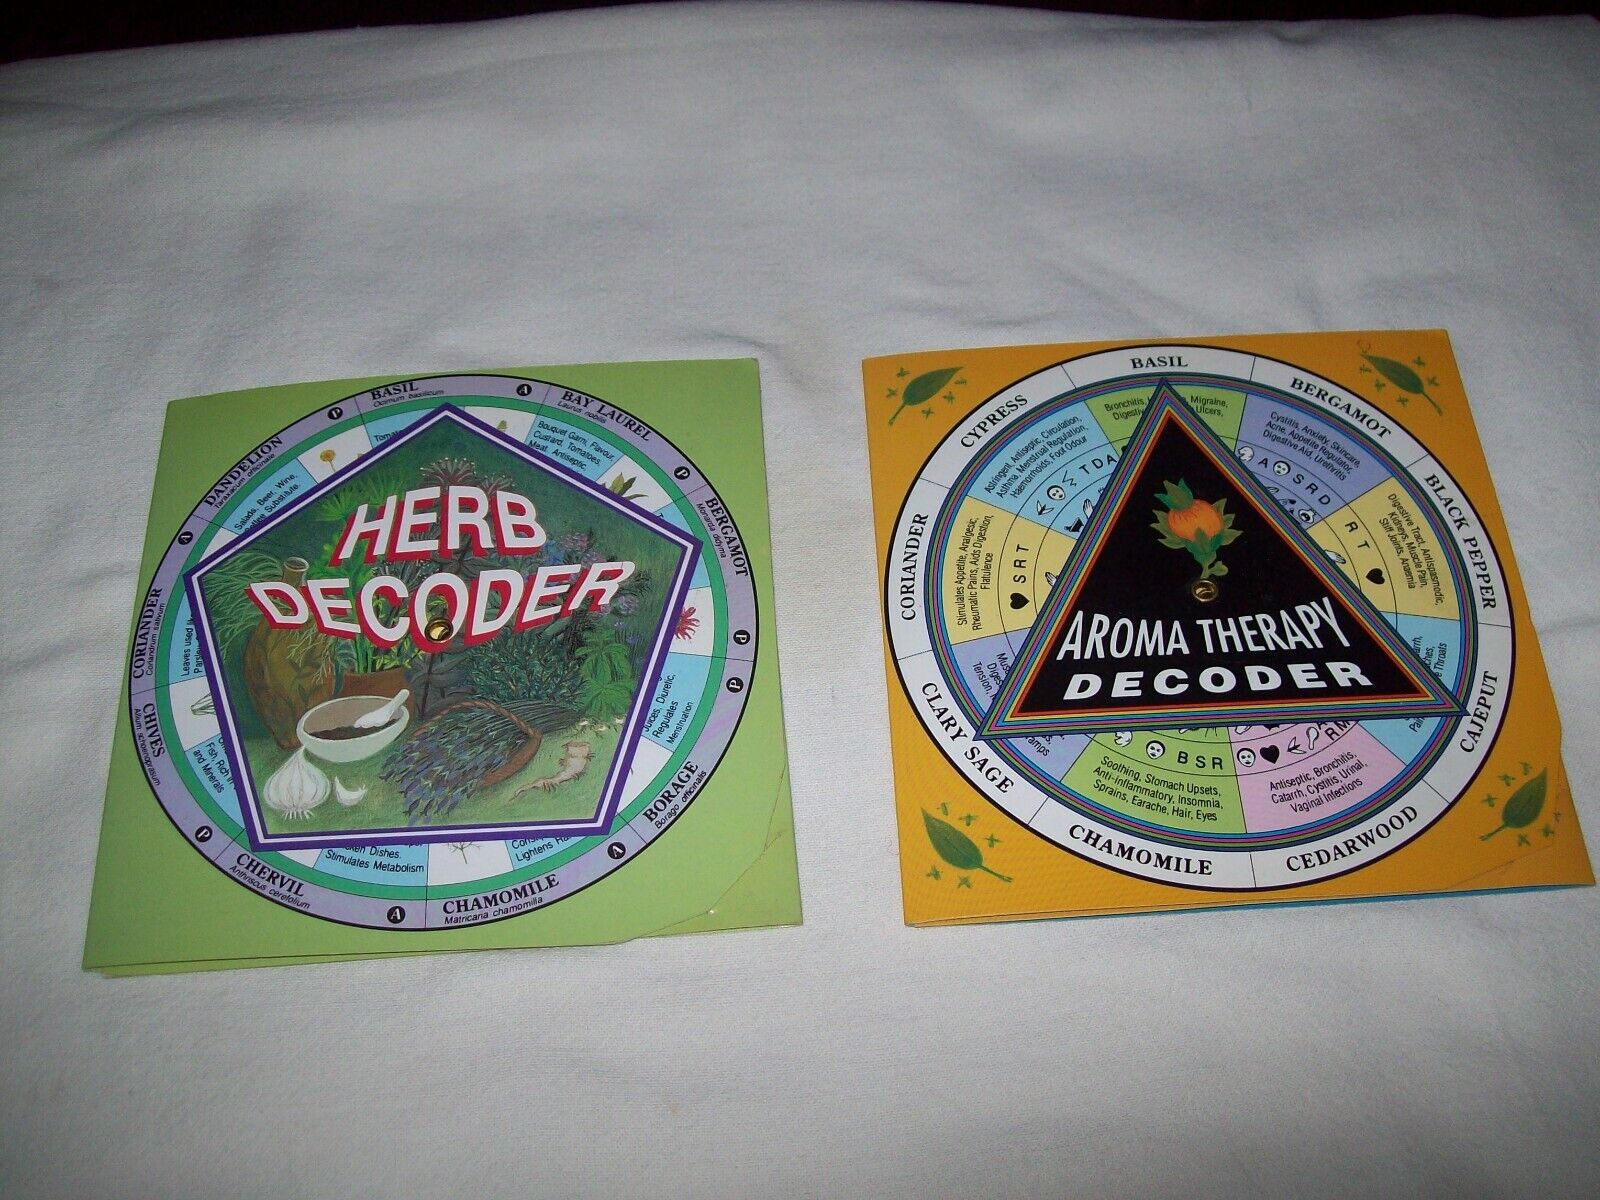 HERB DECODER & AROMA THERAPY Chart Homeopathic Herbal Remedy slide rule wheels